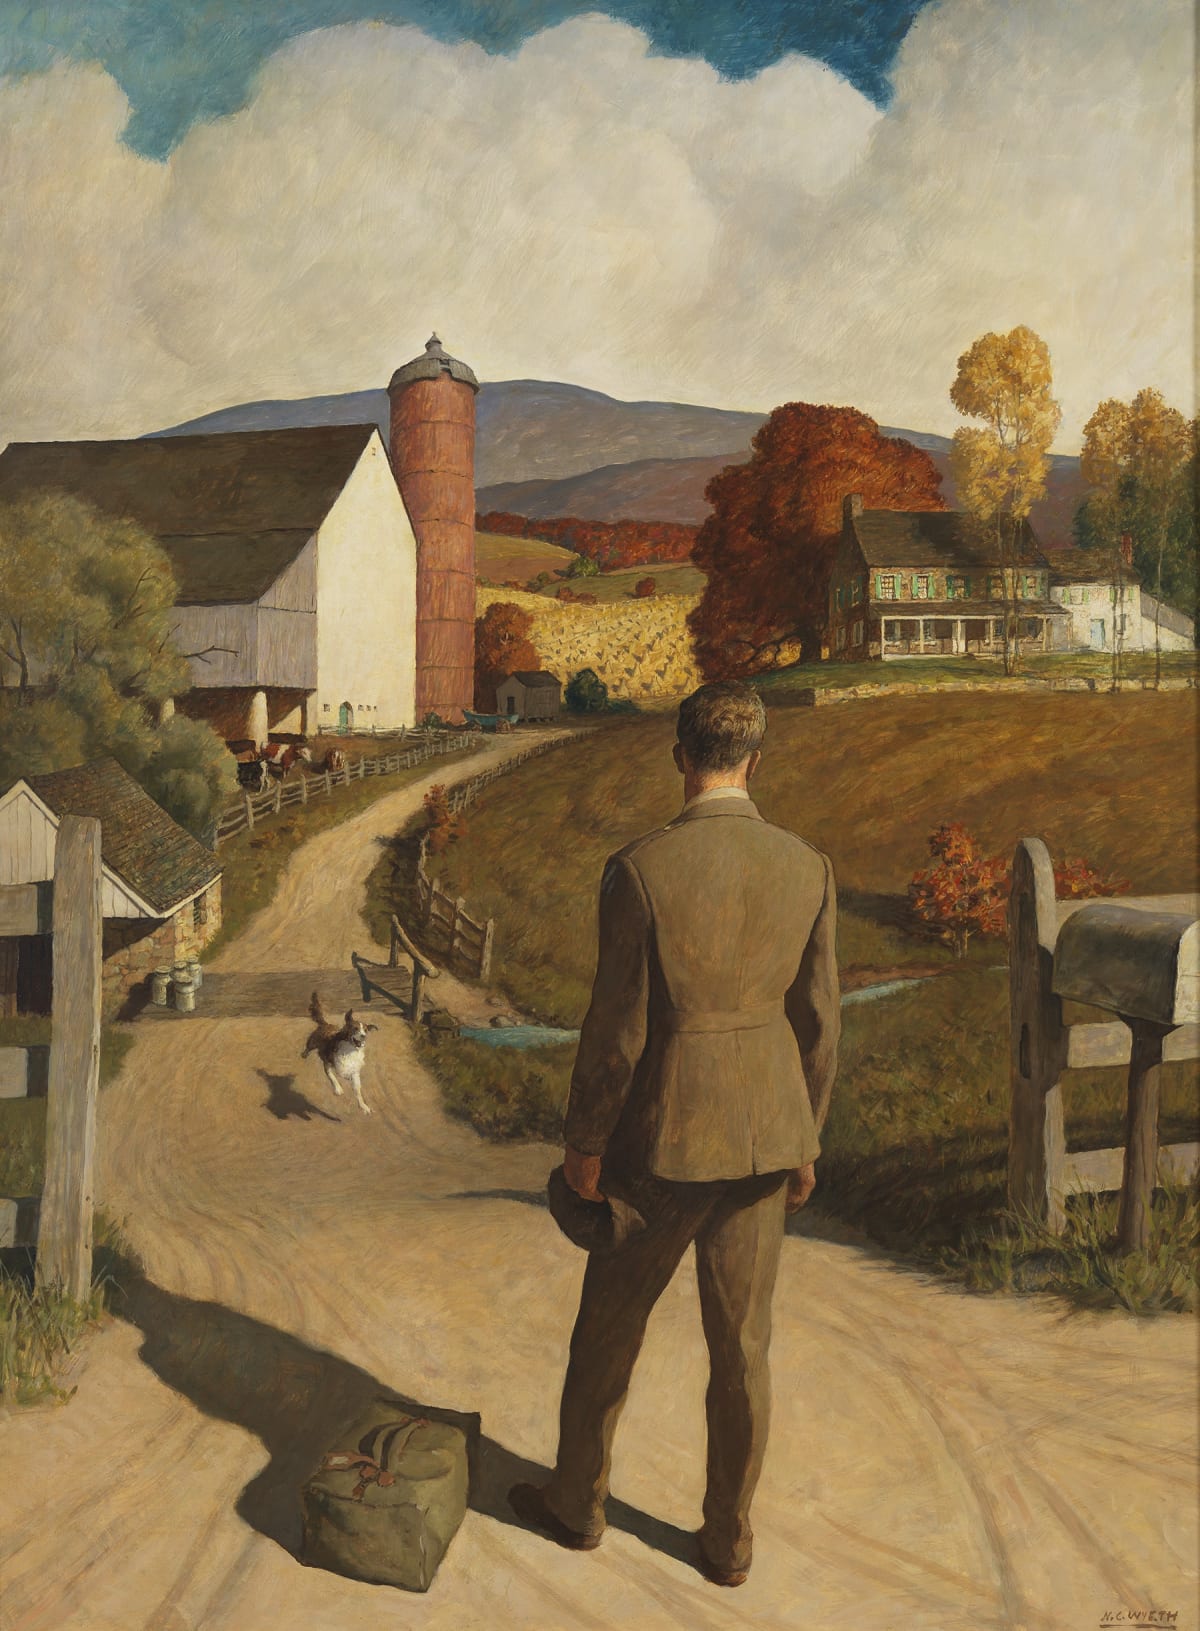 Homer, Wyeth, Rockwell: Three Visions of Veterans , By Jonathan Spies